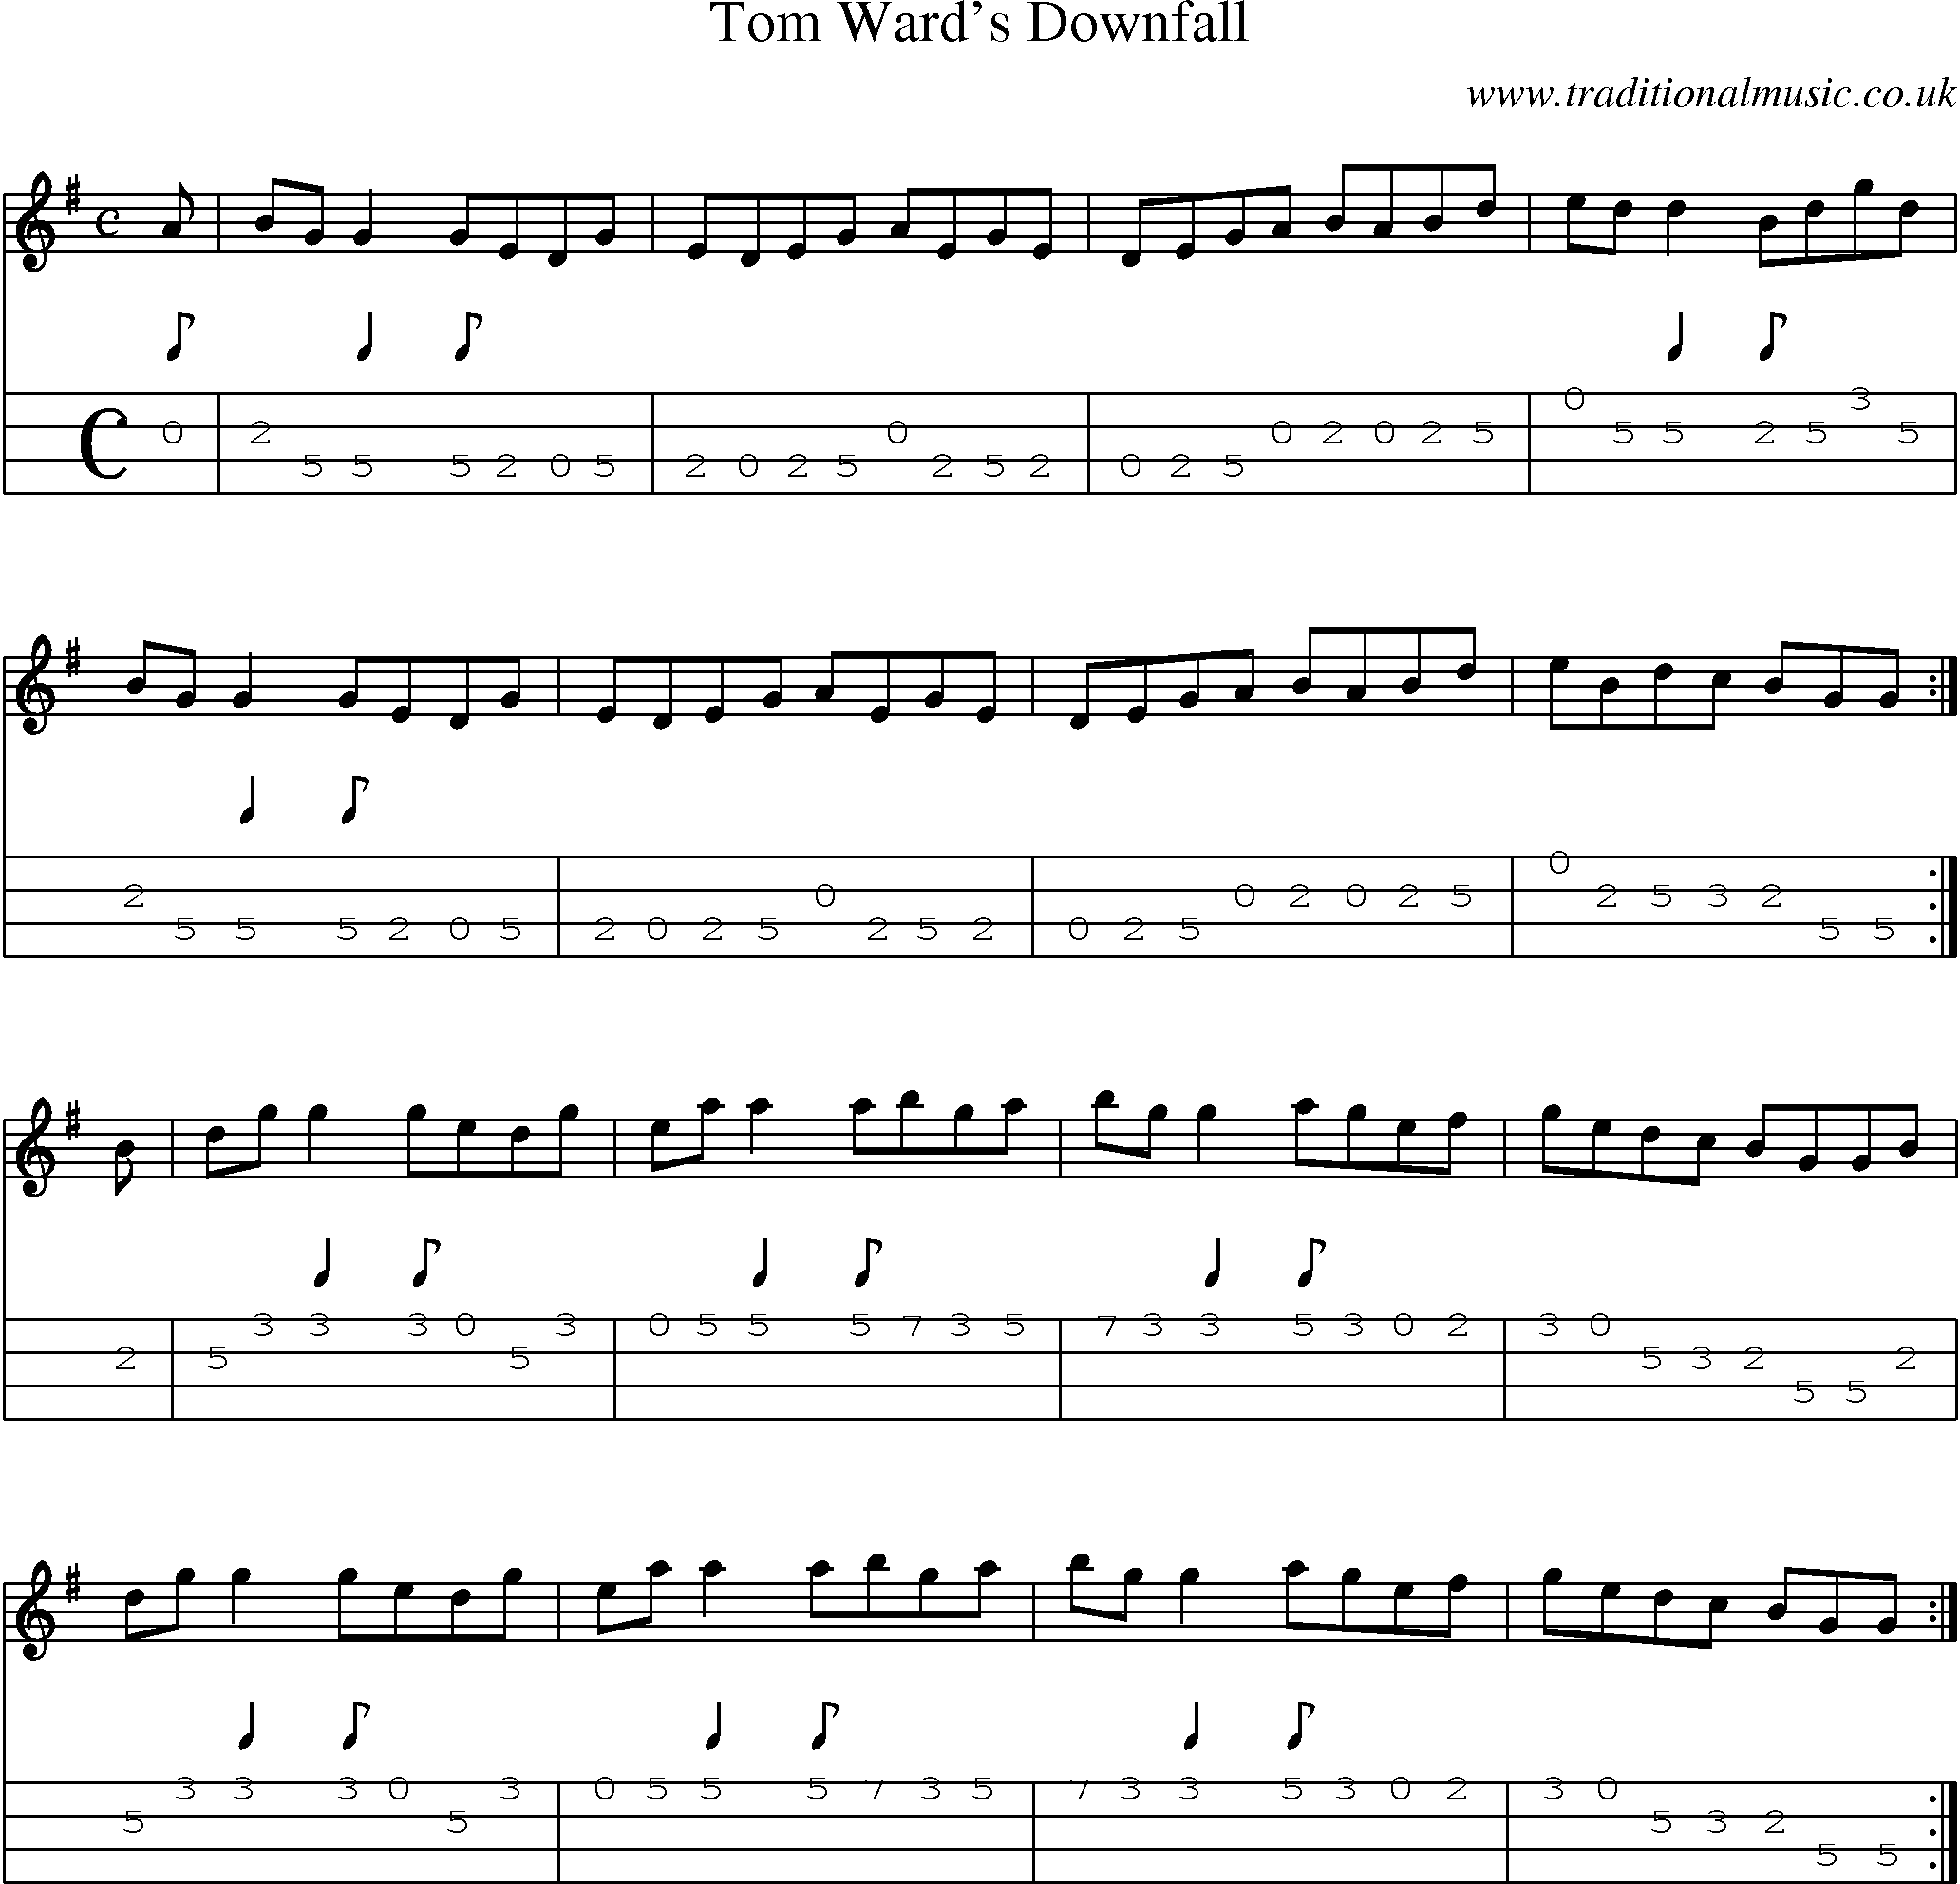 Music Score and Mandolin Tabs for Tom Wards Downfall